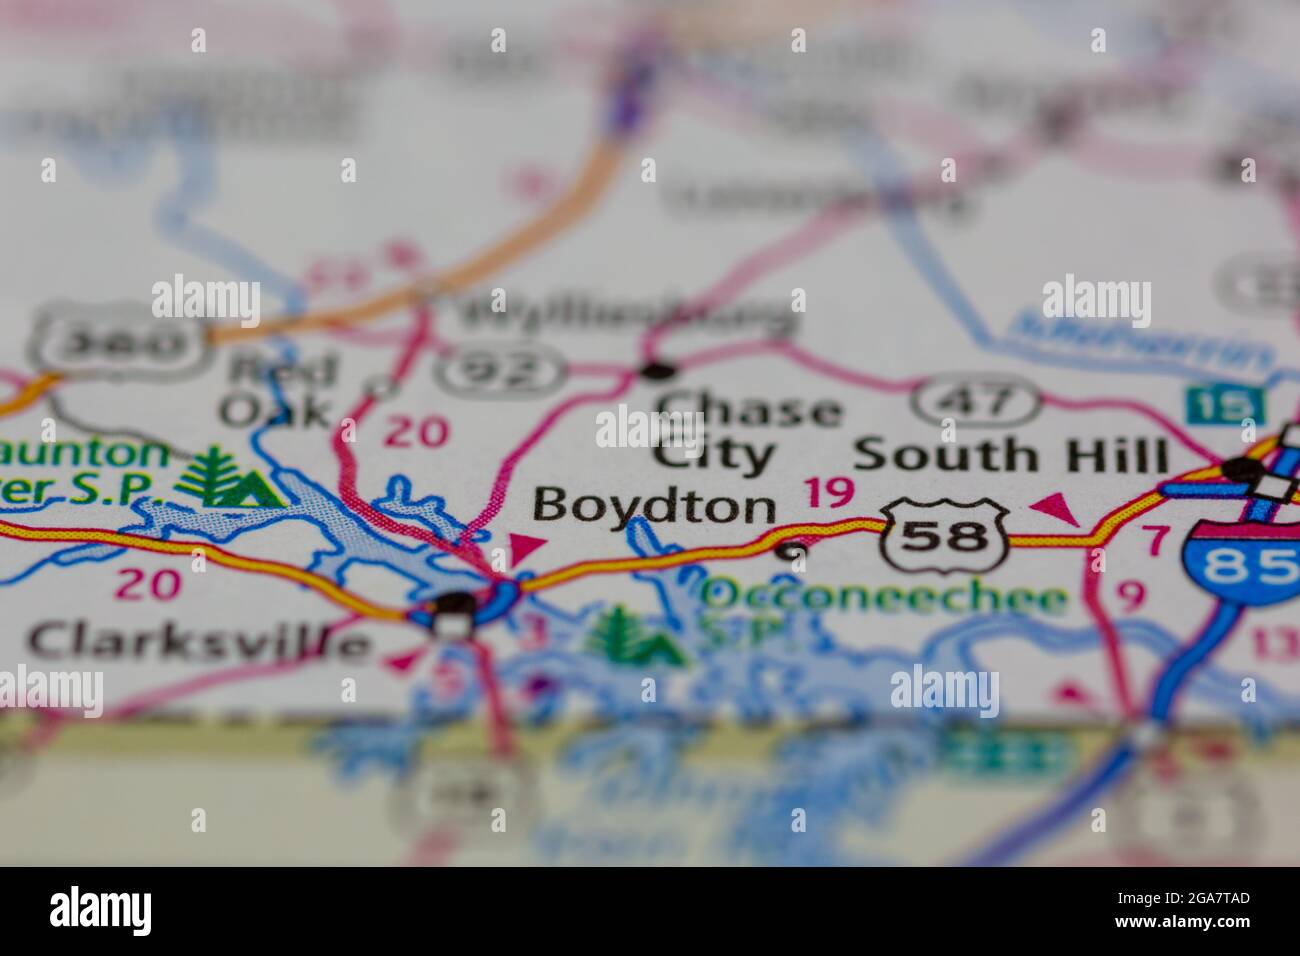 Boydton Virginia shown on a road map or Geography map Stock Photo